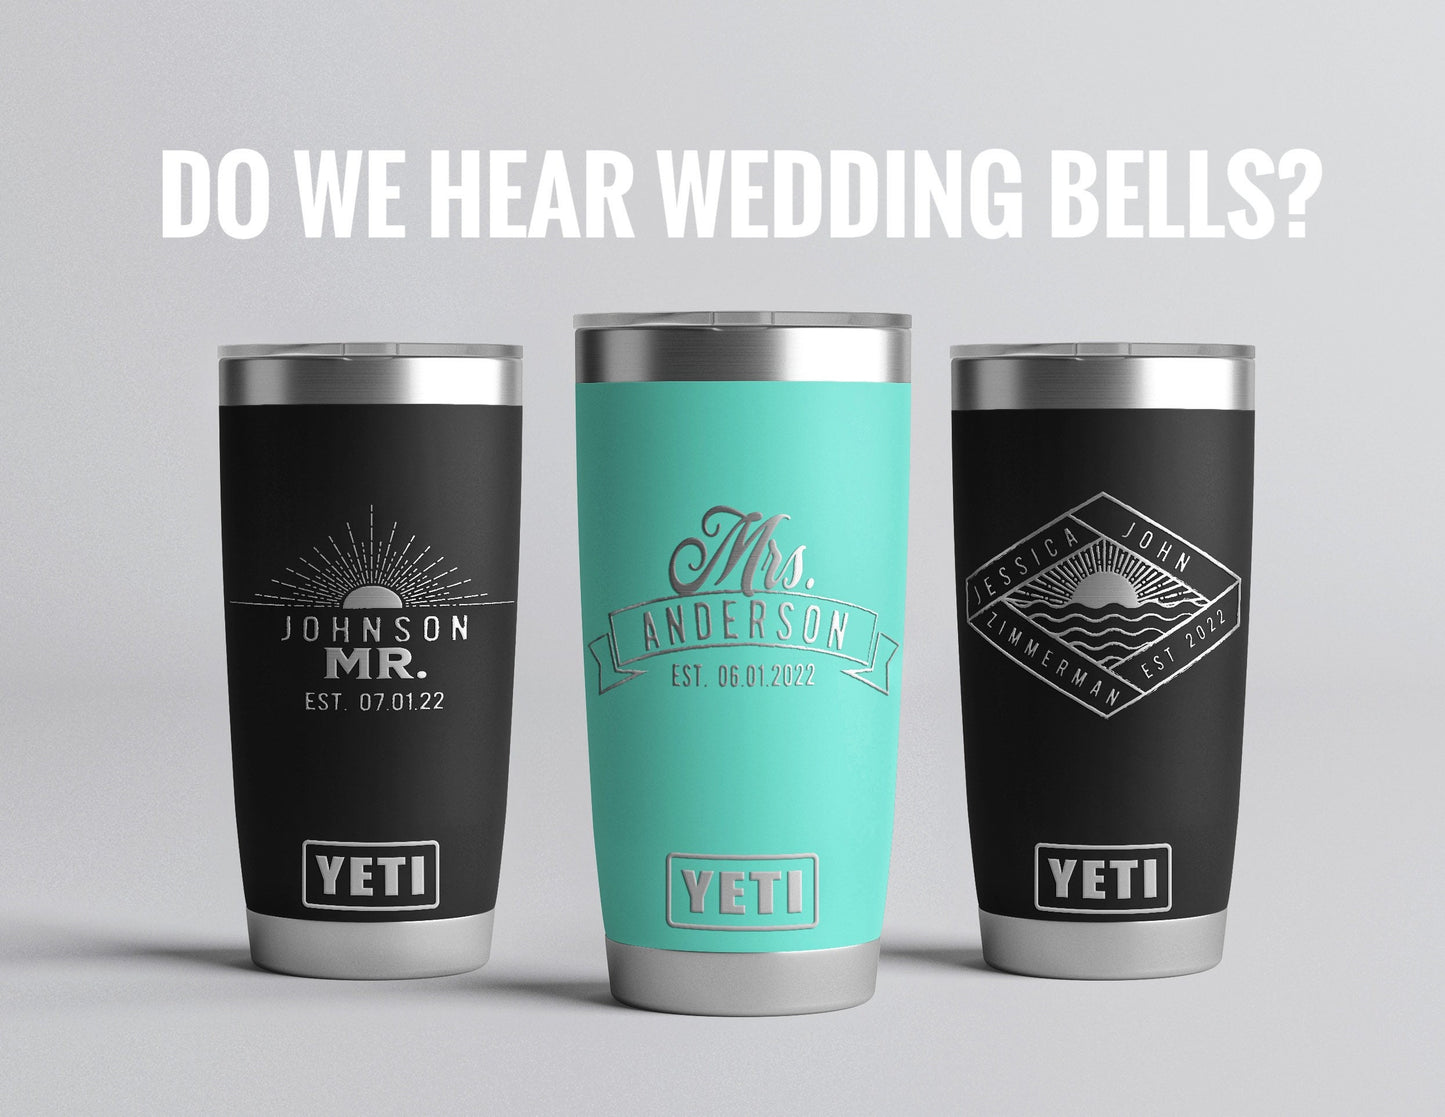 Set of 5 Personalized Polar Camel or YETI Insulated Mug, Groomsmen Gifts,  Best Man Gift, Groomsman Gift, Wedding Party Gifts, ENGRAVED not a decal.